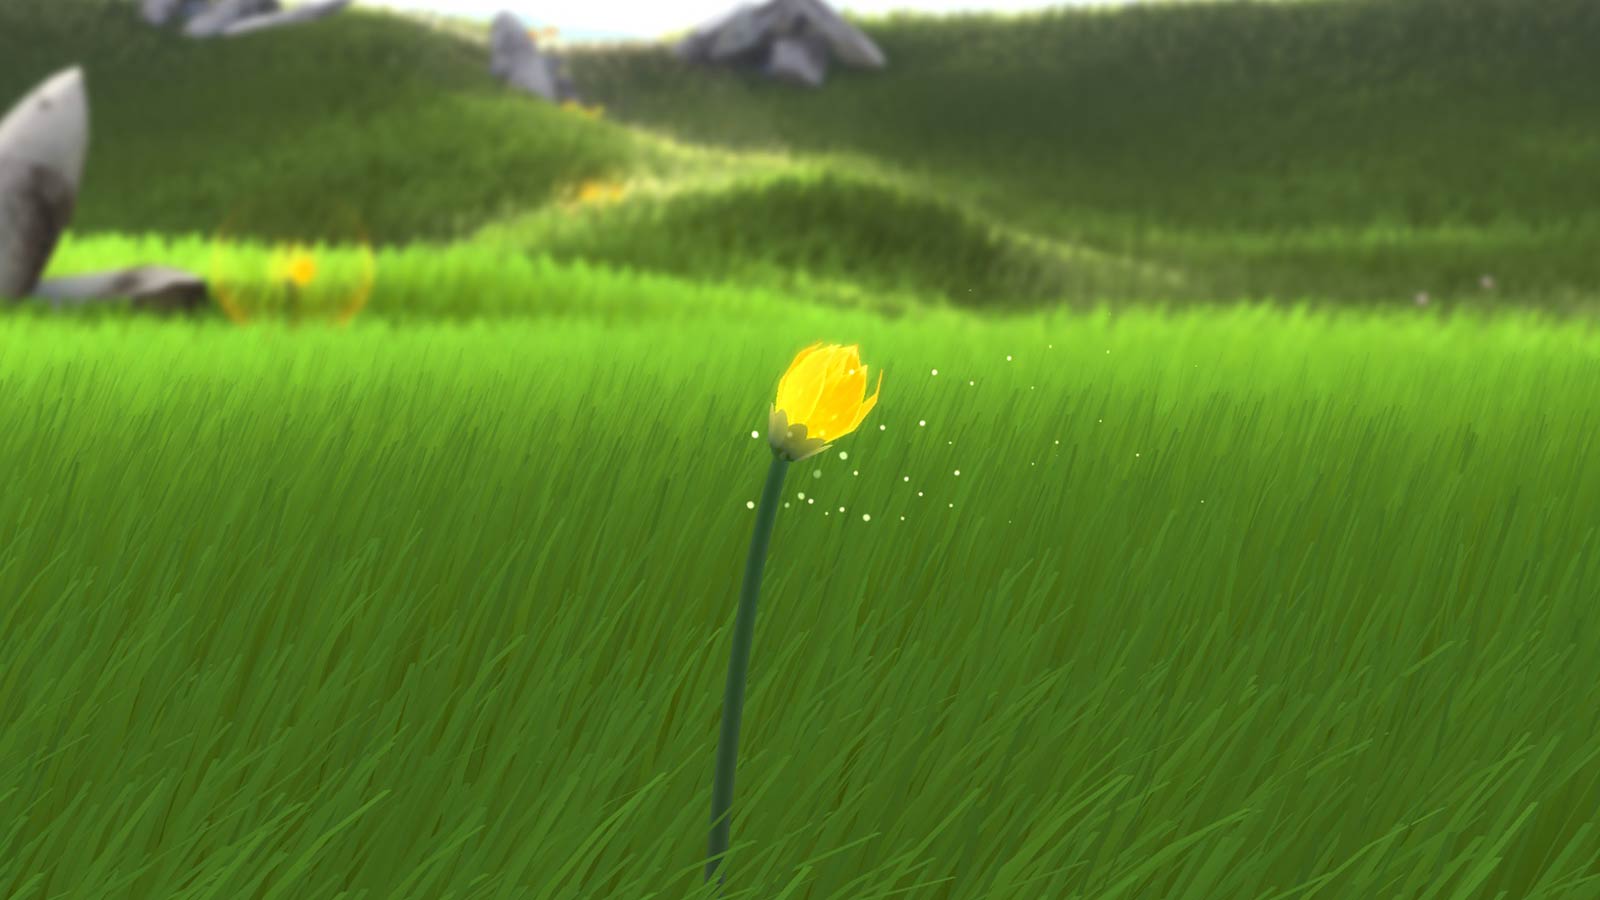 Flower Added To Smithsonian's Permanent Collection - thatgamecompany